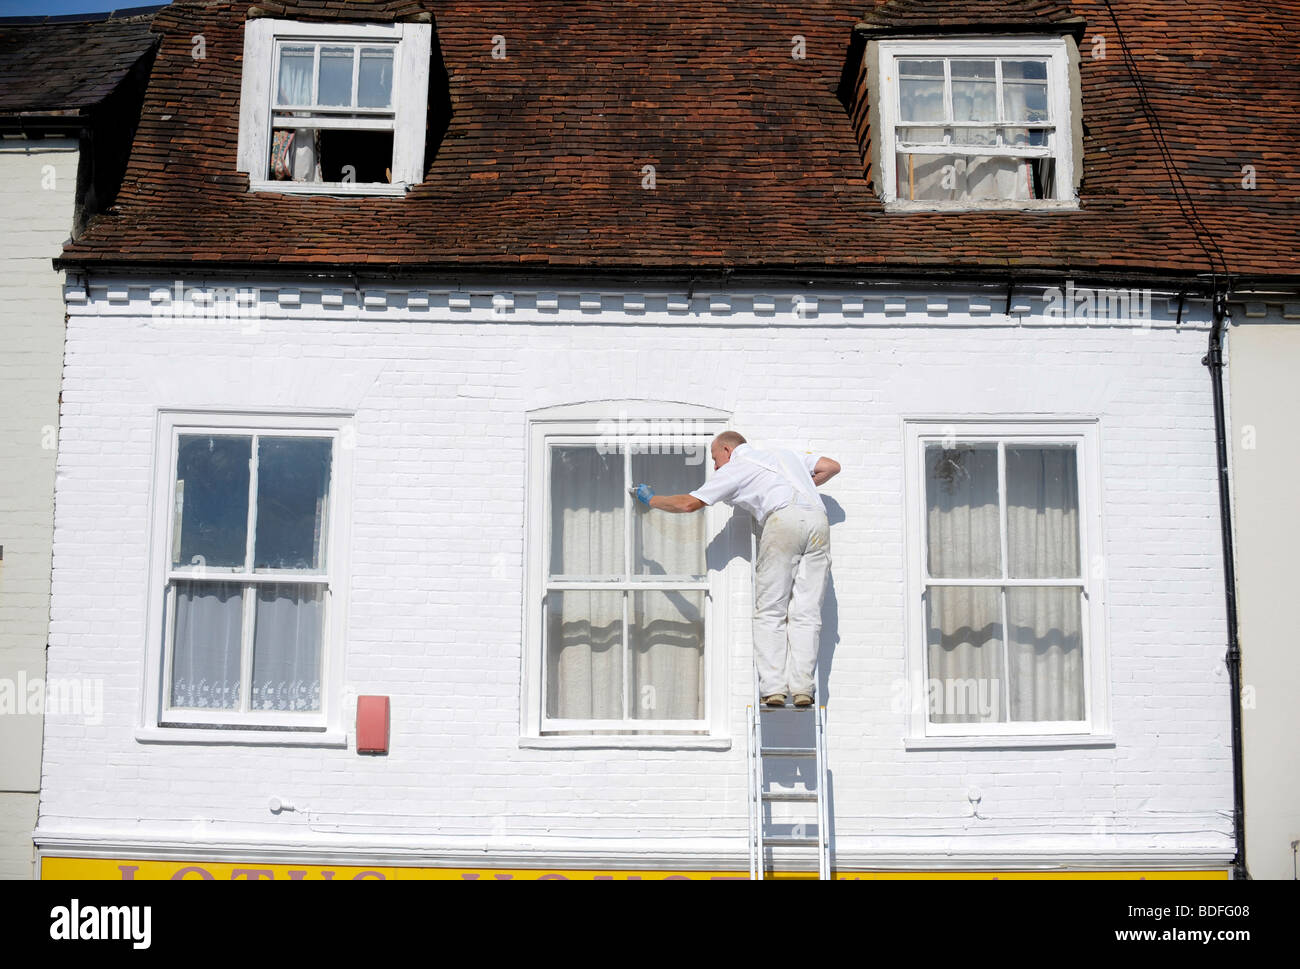 A man high up a ladder painting a window in Chichester, West Sussex, UK. Picture by Jim Holden. Stock Photo